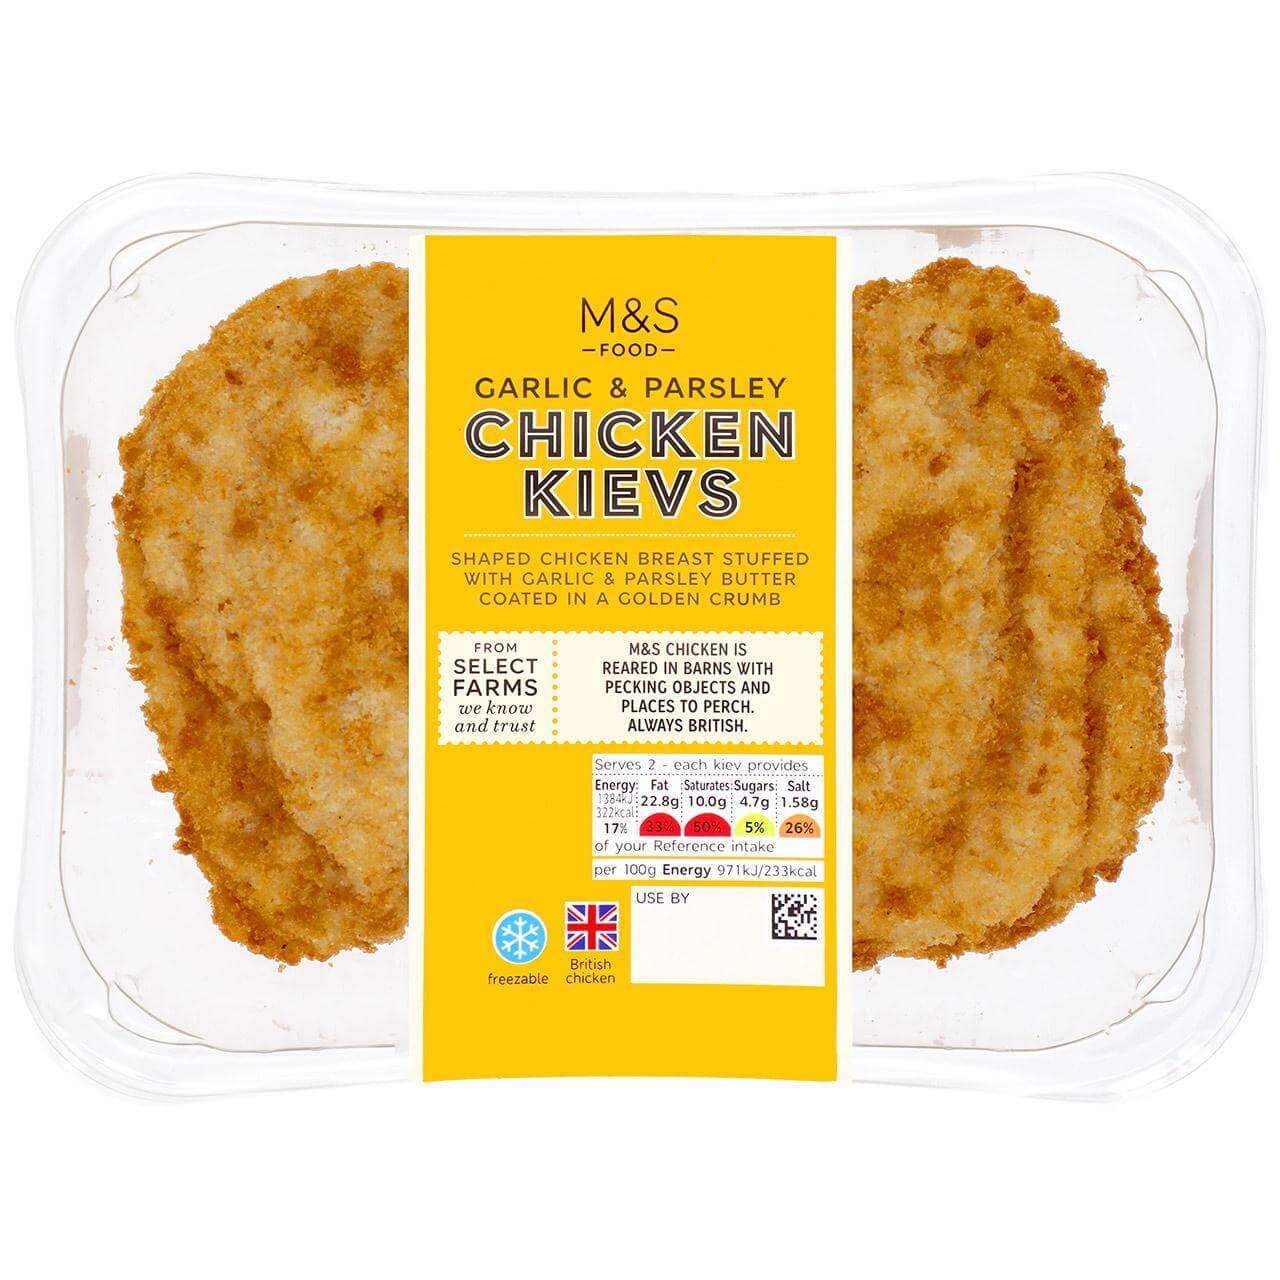 Image of M&S British Garlic Chicken Kievs made in the UK by Marks & Spencer Food. Buying this product supports a UK business, jobs and the local community